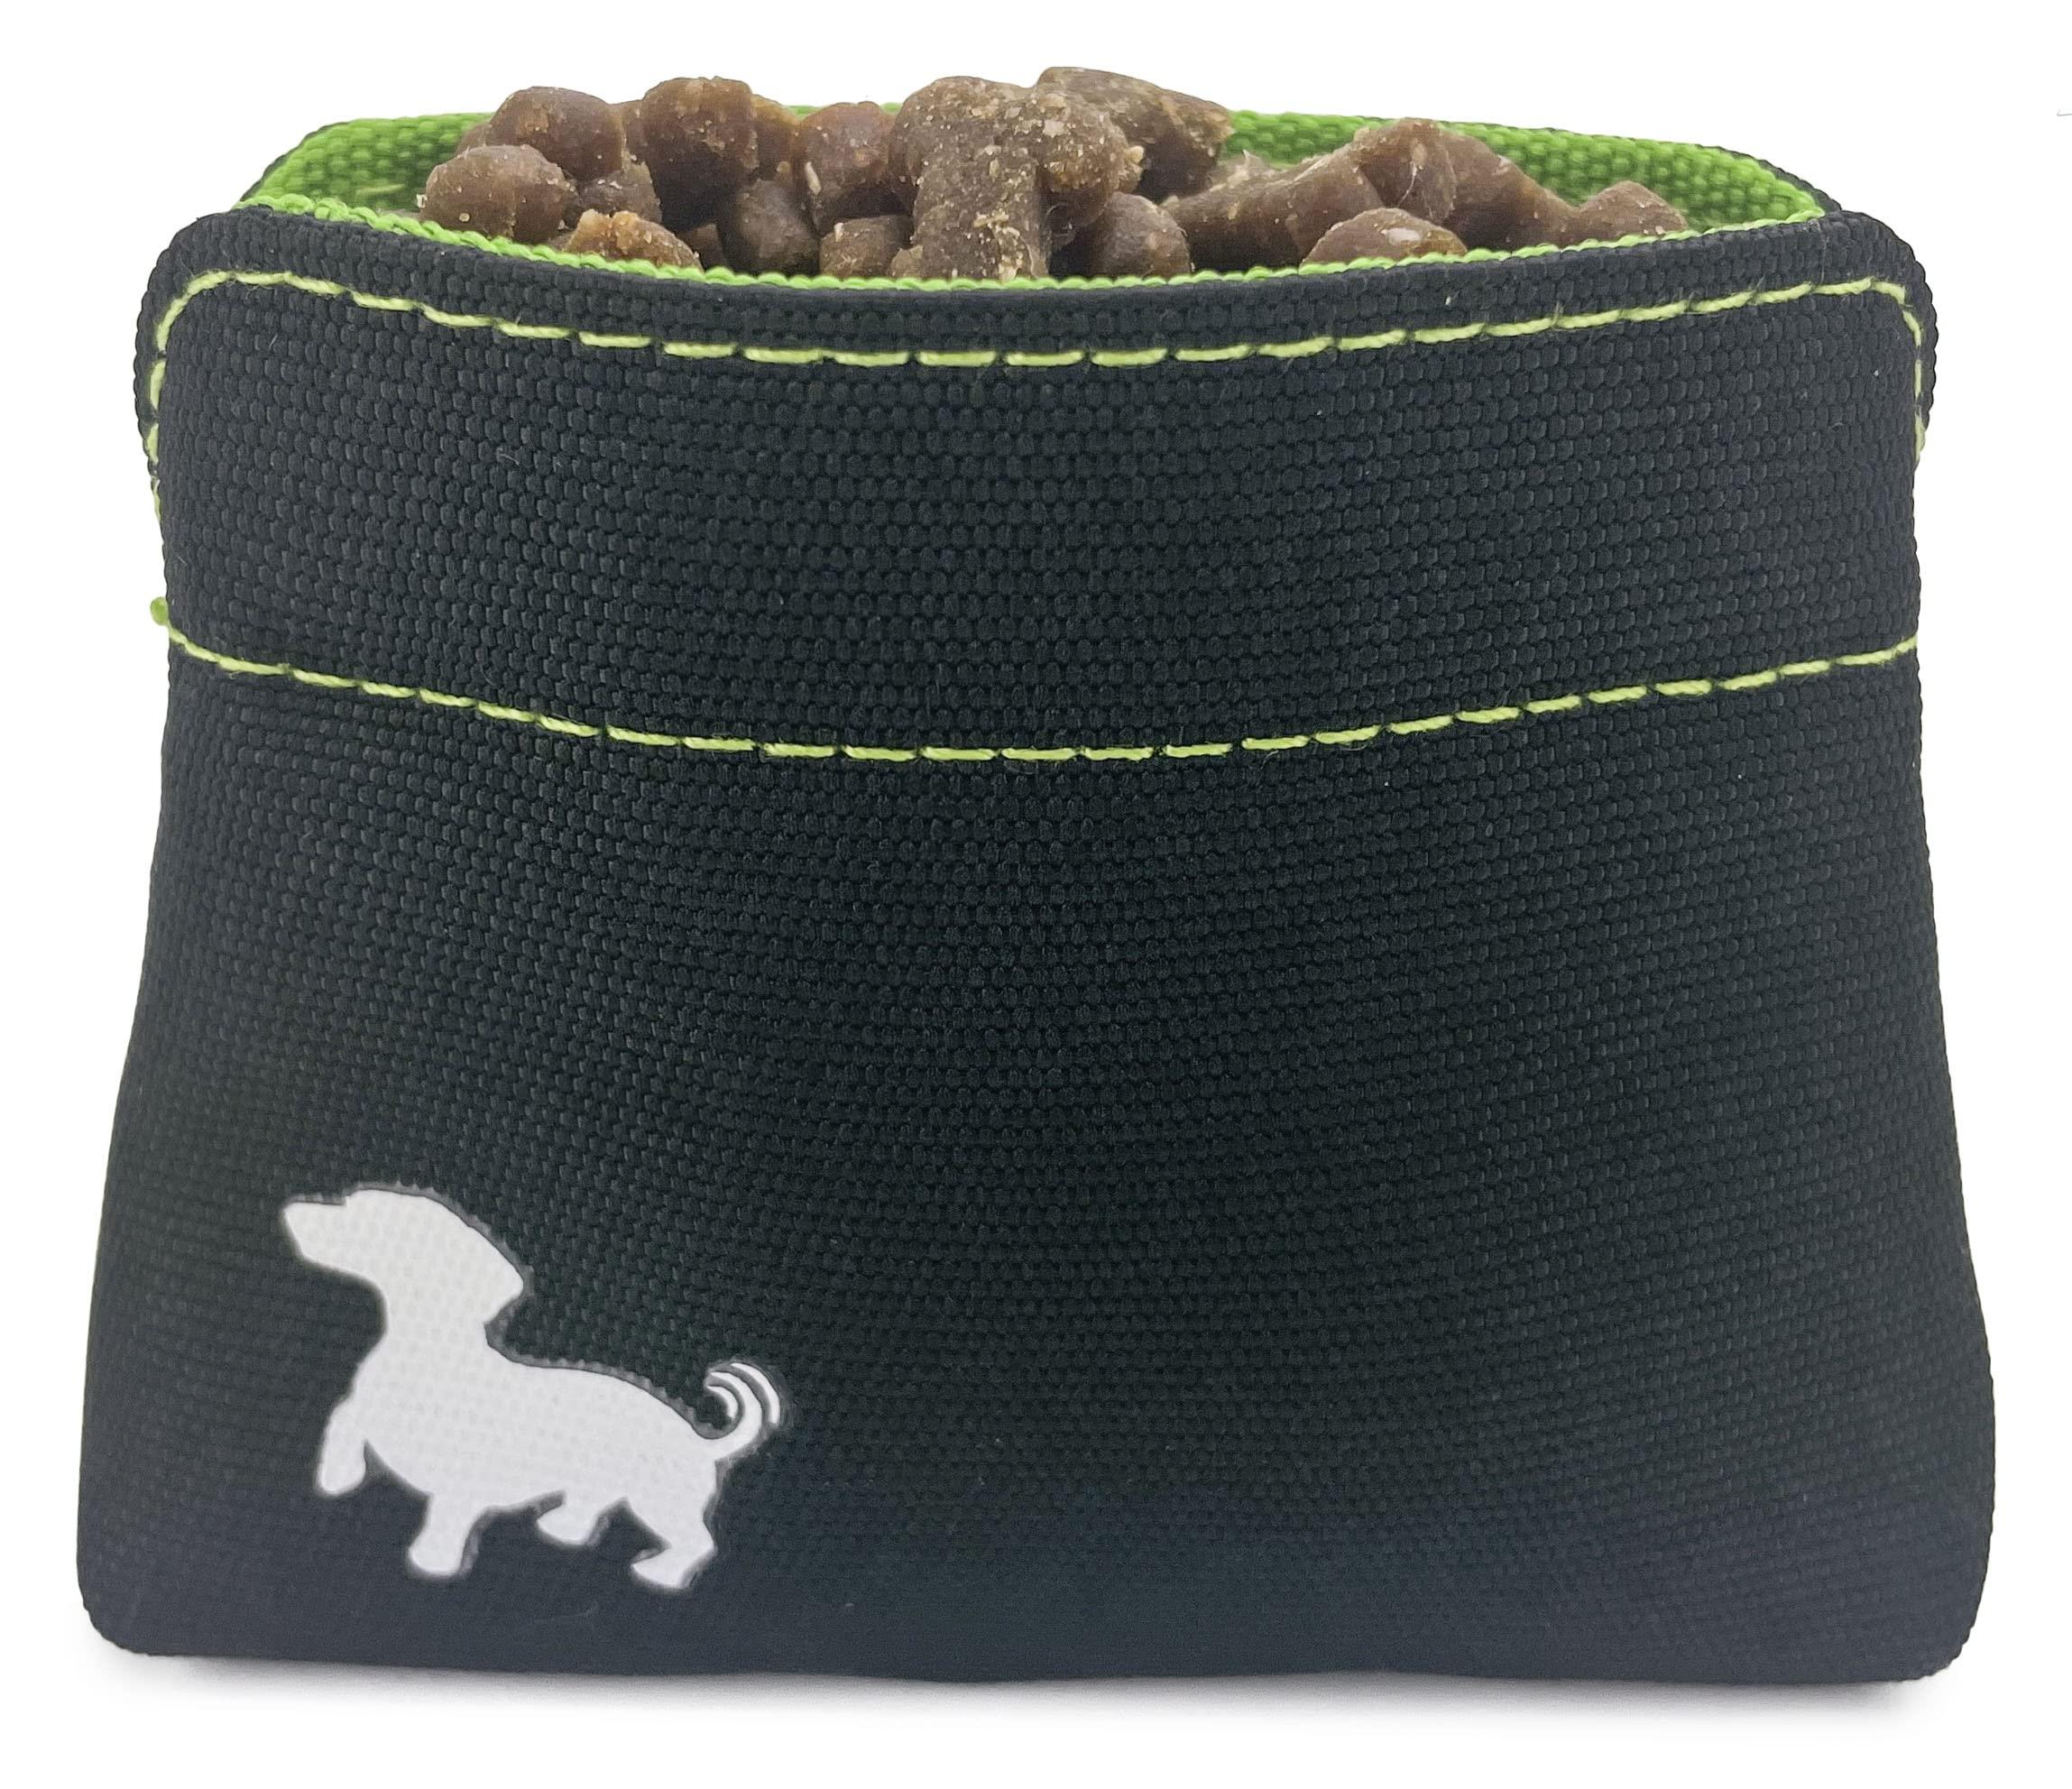 Swaggly Pocket Sized Dog Treat Pouch - Treat Pouches for Pet Training - Dog Treat Pouch Magnetic Closure - Dog Walking Accessories - Black with Green Interior